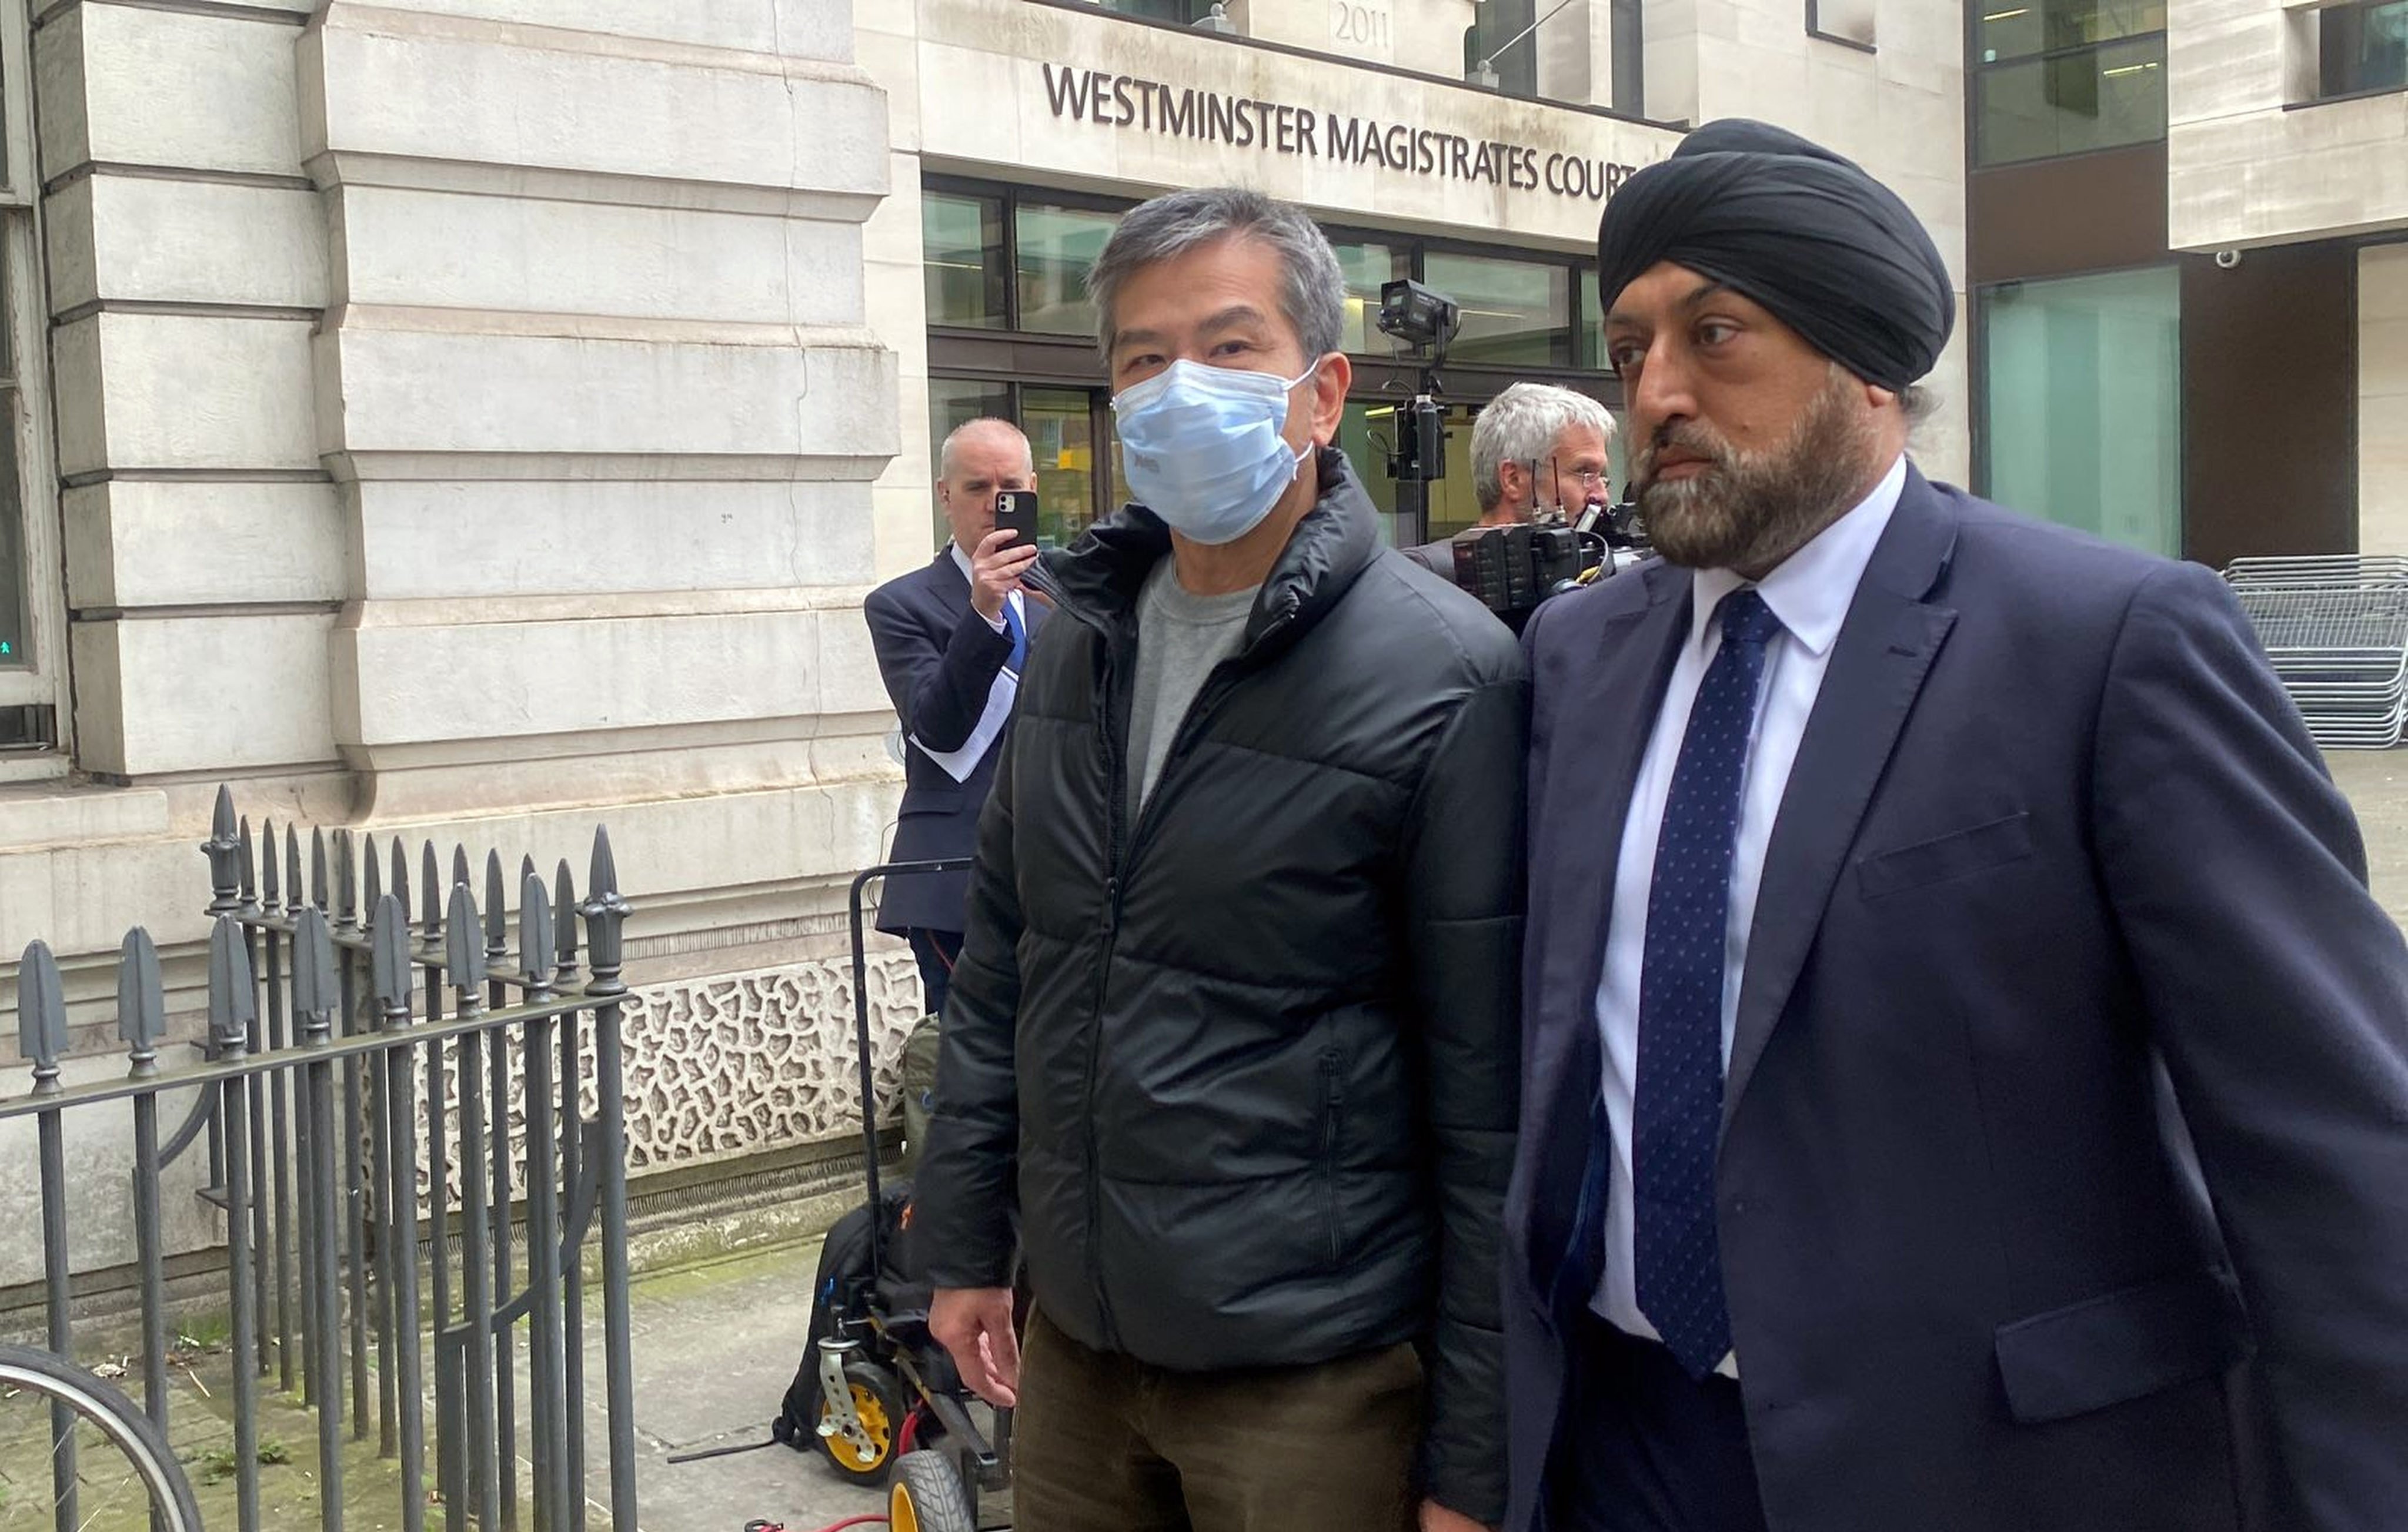 Billy Yuen (left) appeared at Westminster Magistrates’ Court on Monday. Photo: Jack Tsang